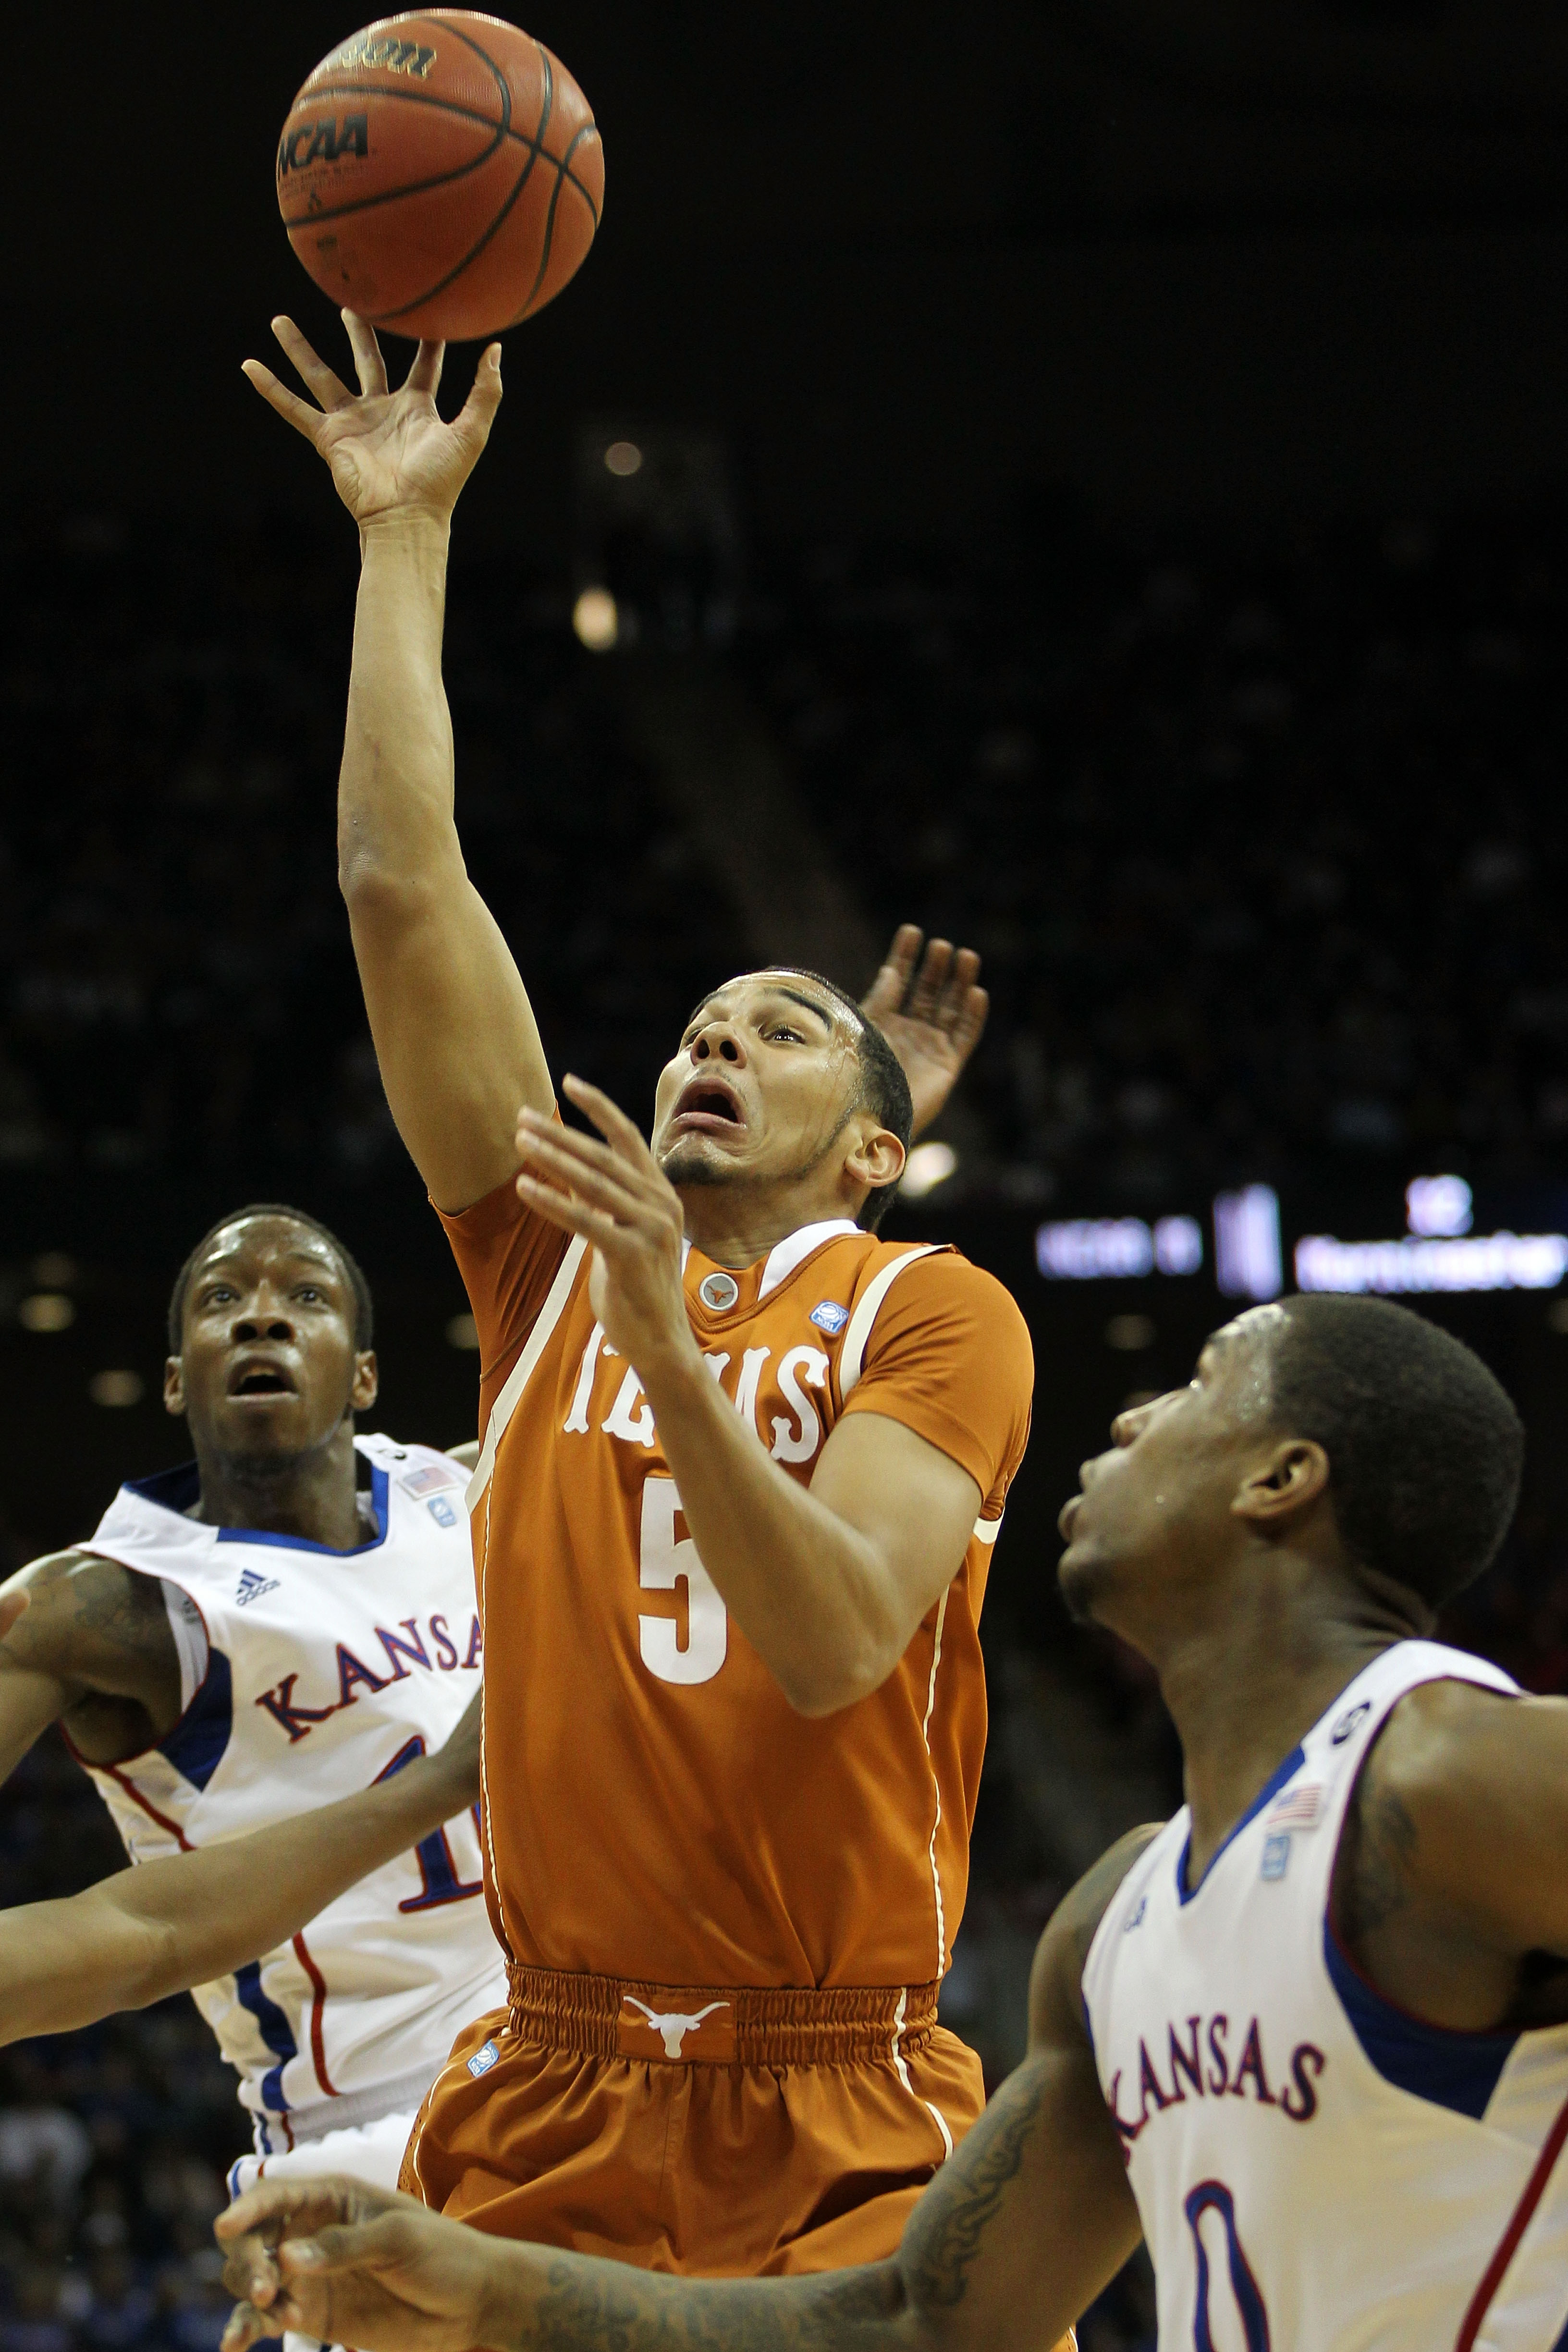 KANSAS CITY, MO - MARCH 12:  Cory Joseph #5 of the Texas Longhorns goes up for a shot against the Kansas Jayhawks in the first half of the 2011 Phillips 66 Big 12 Men's Basketball Tournament championship game at Sprint Center on March 12, 2011 in Kansas C